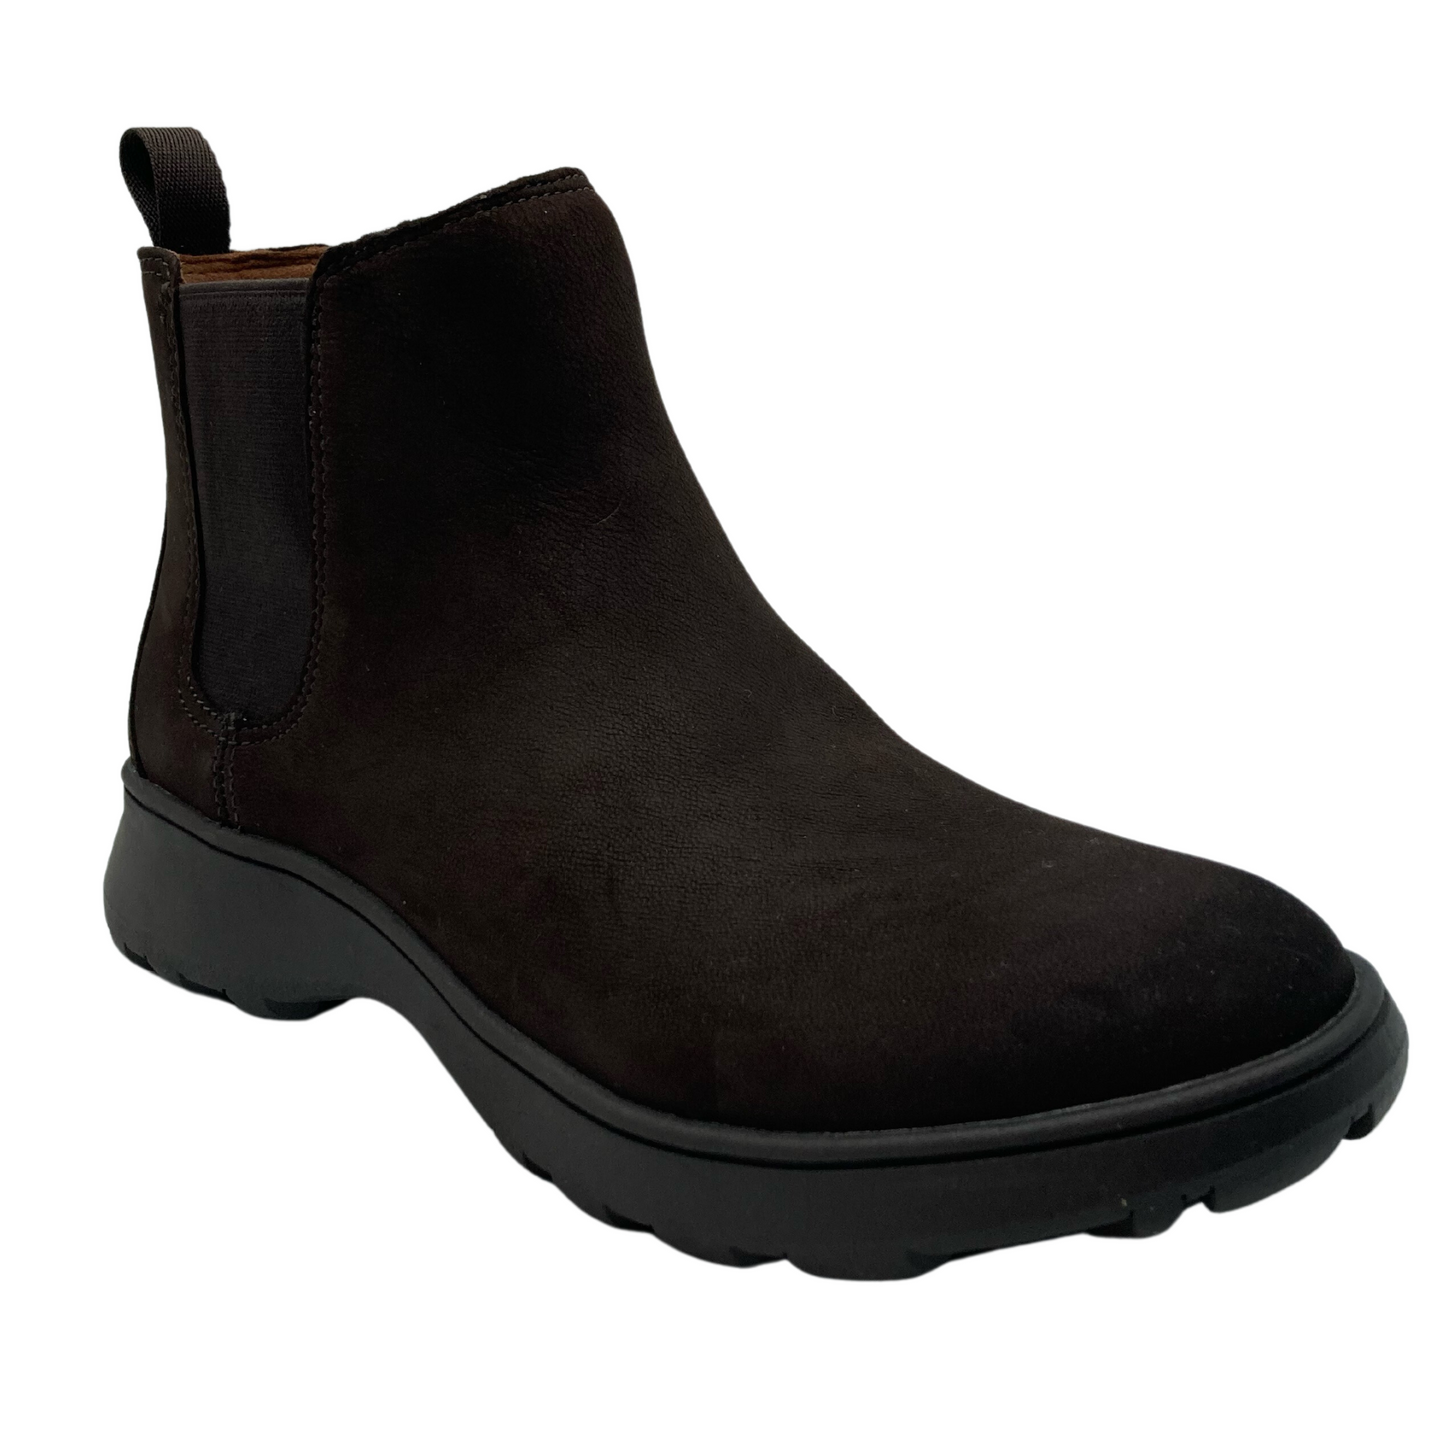 45 degree angled view of dark chocolate nubuck bootie with elastic gore and pull-on tab